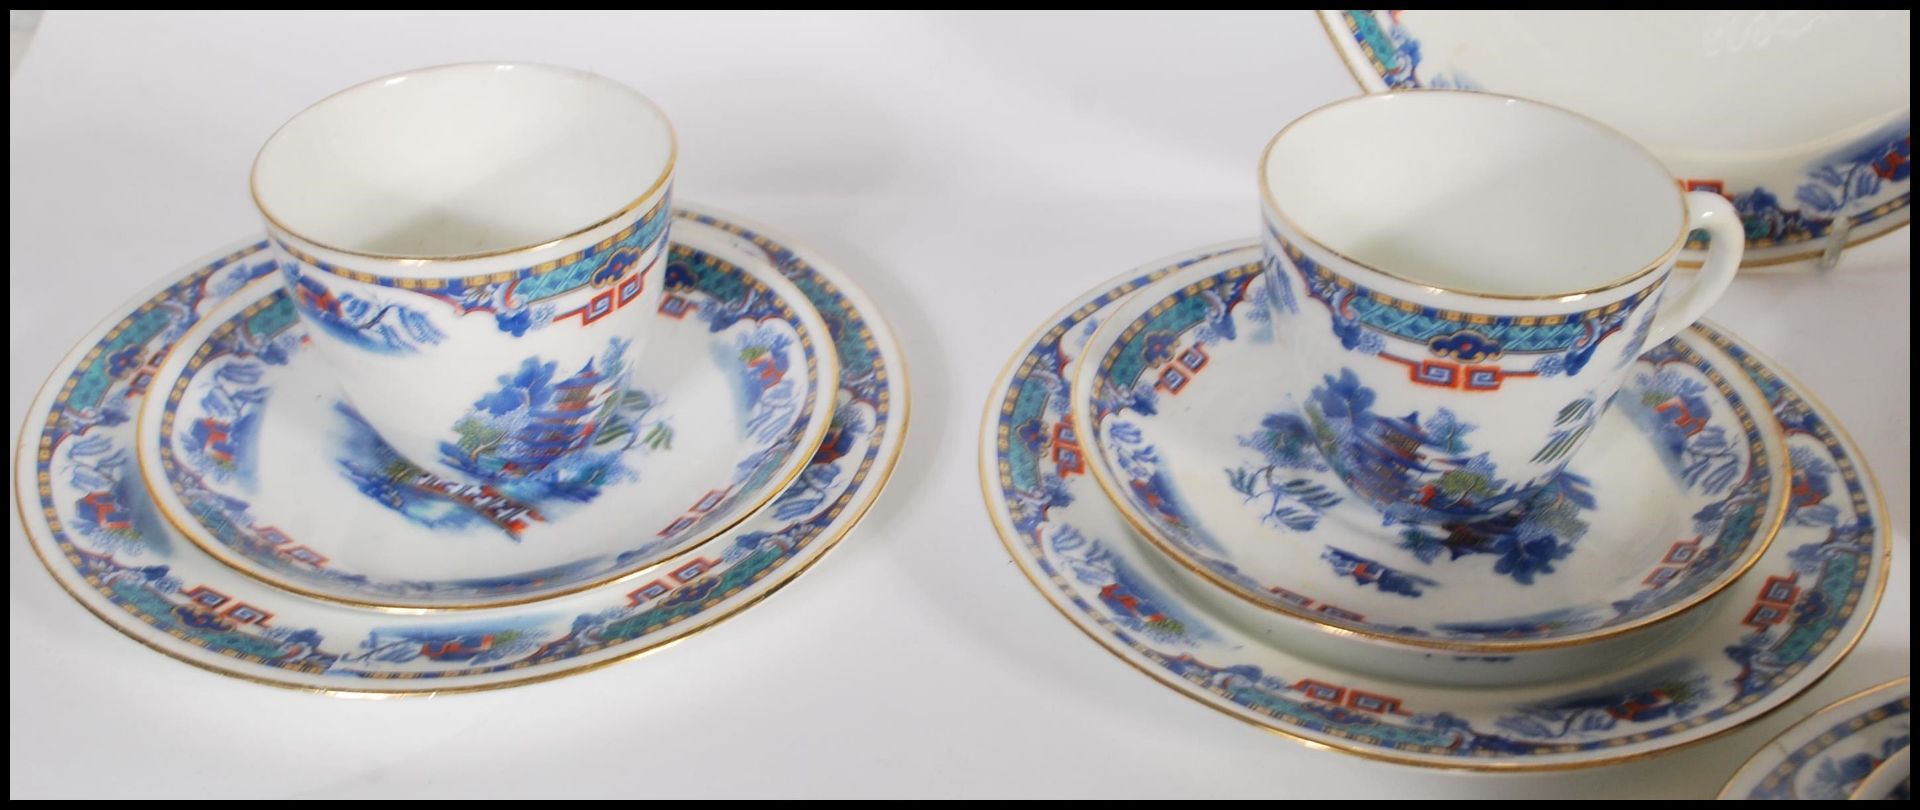 A 20th Century Staffordshire blue and white tea service in the Willow pattern, having red and - Image 2 of 8